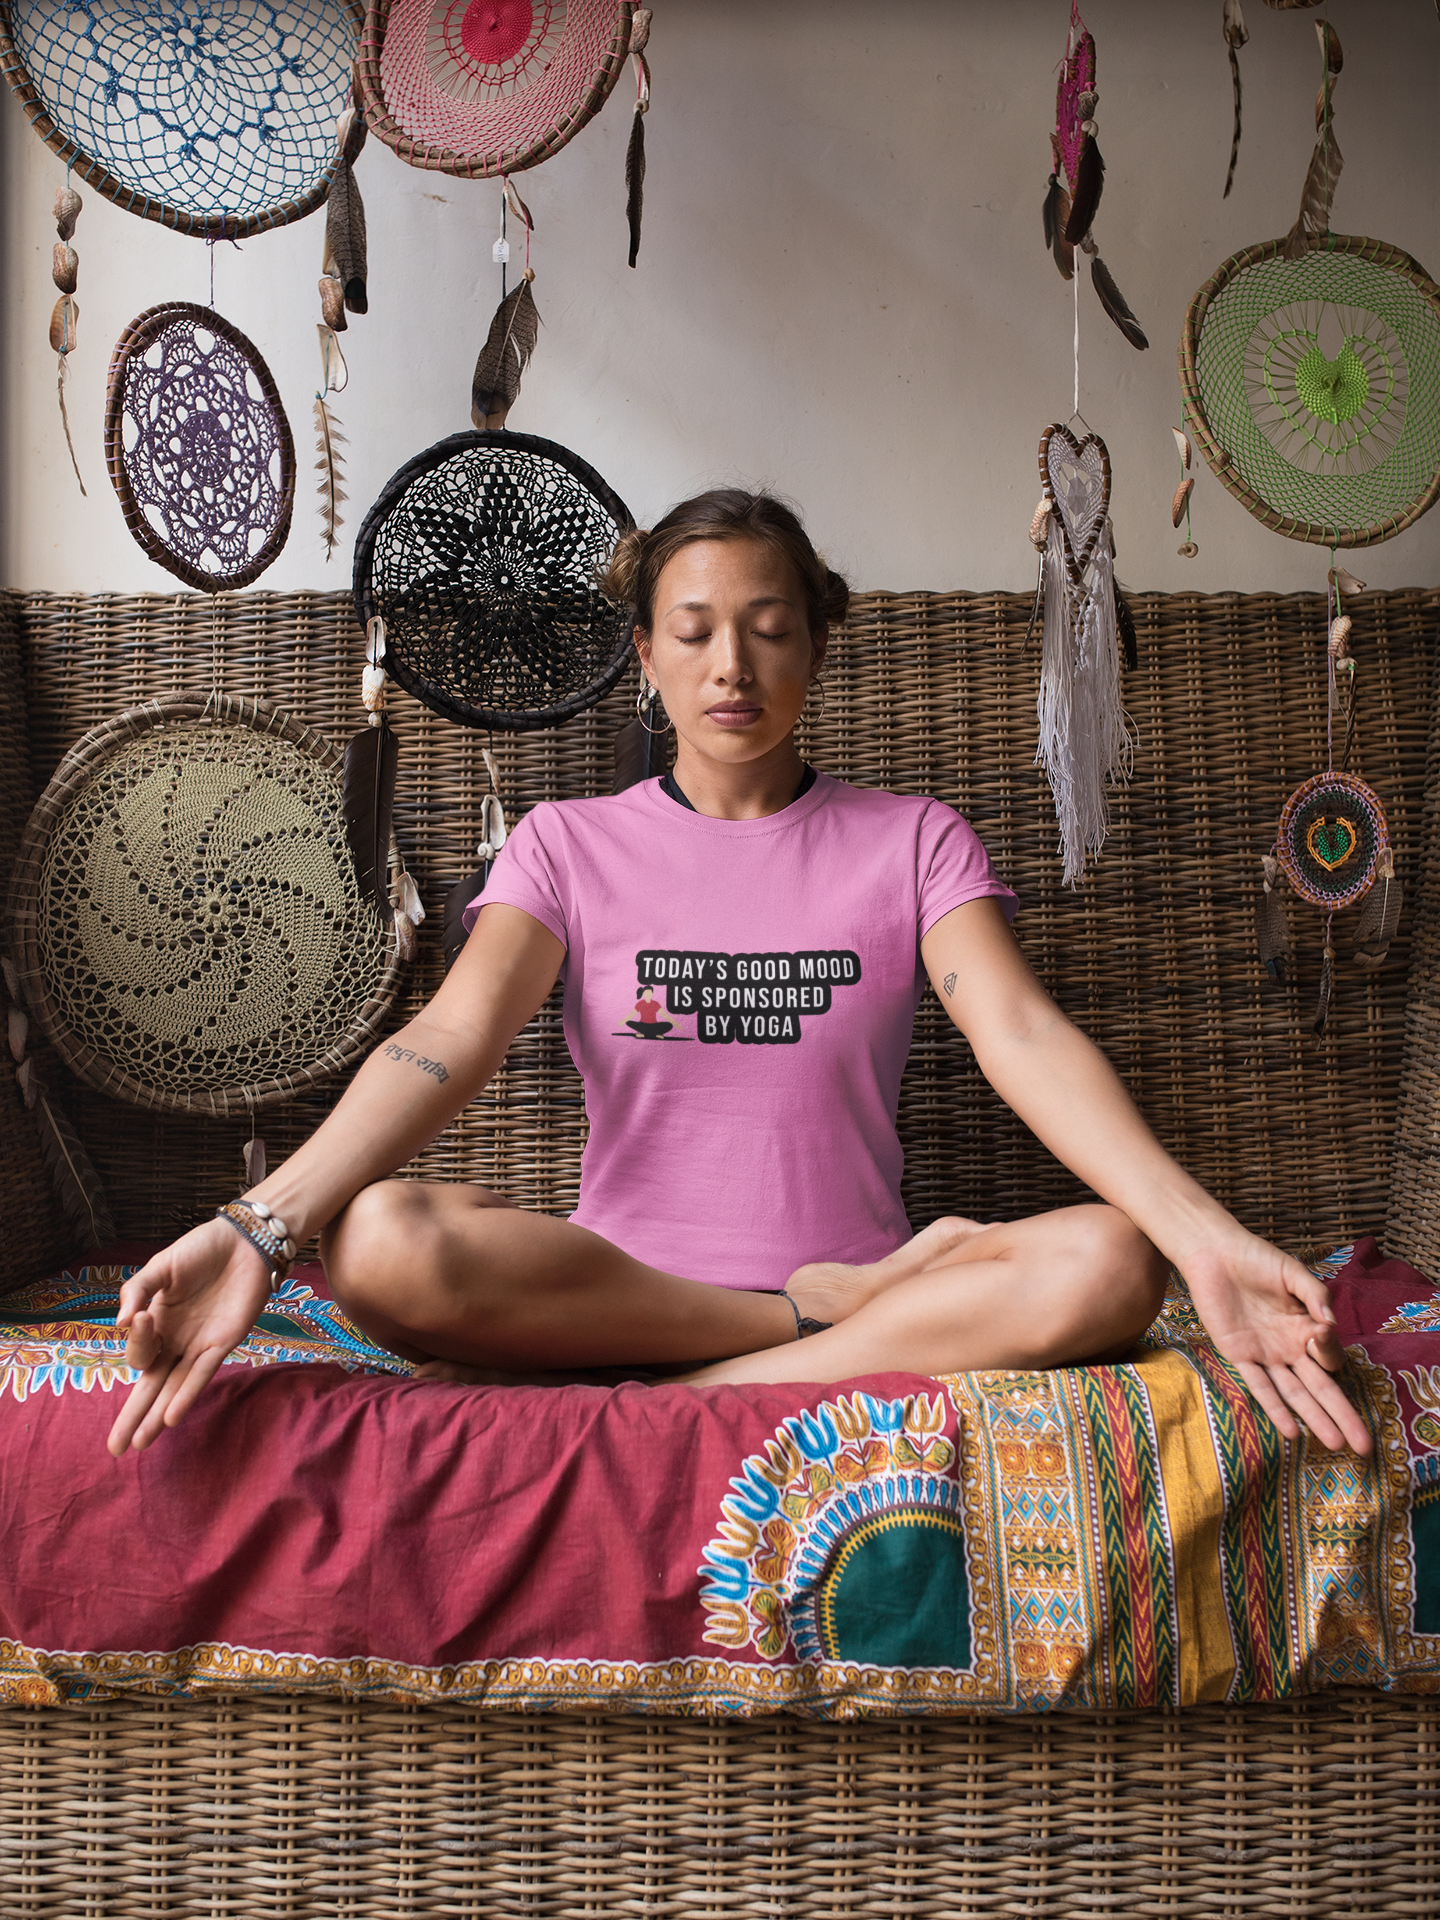 Today’s good mood is sponsored by YOGA. Yoga T-shirt